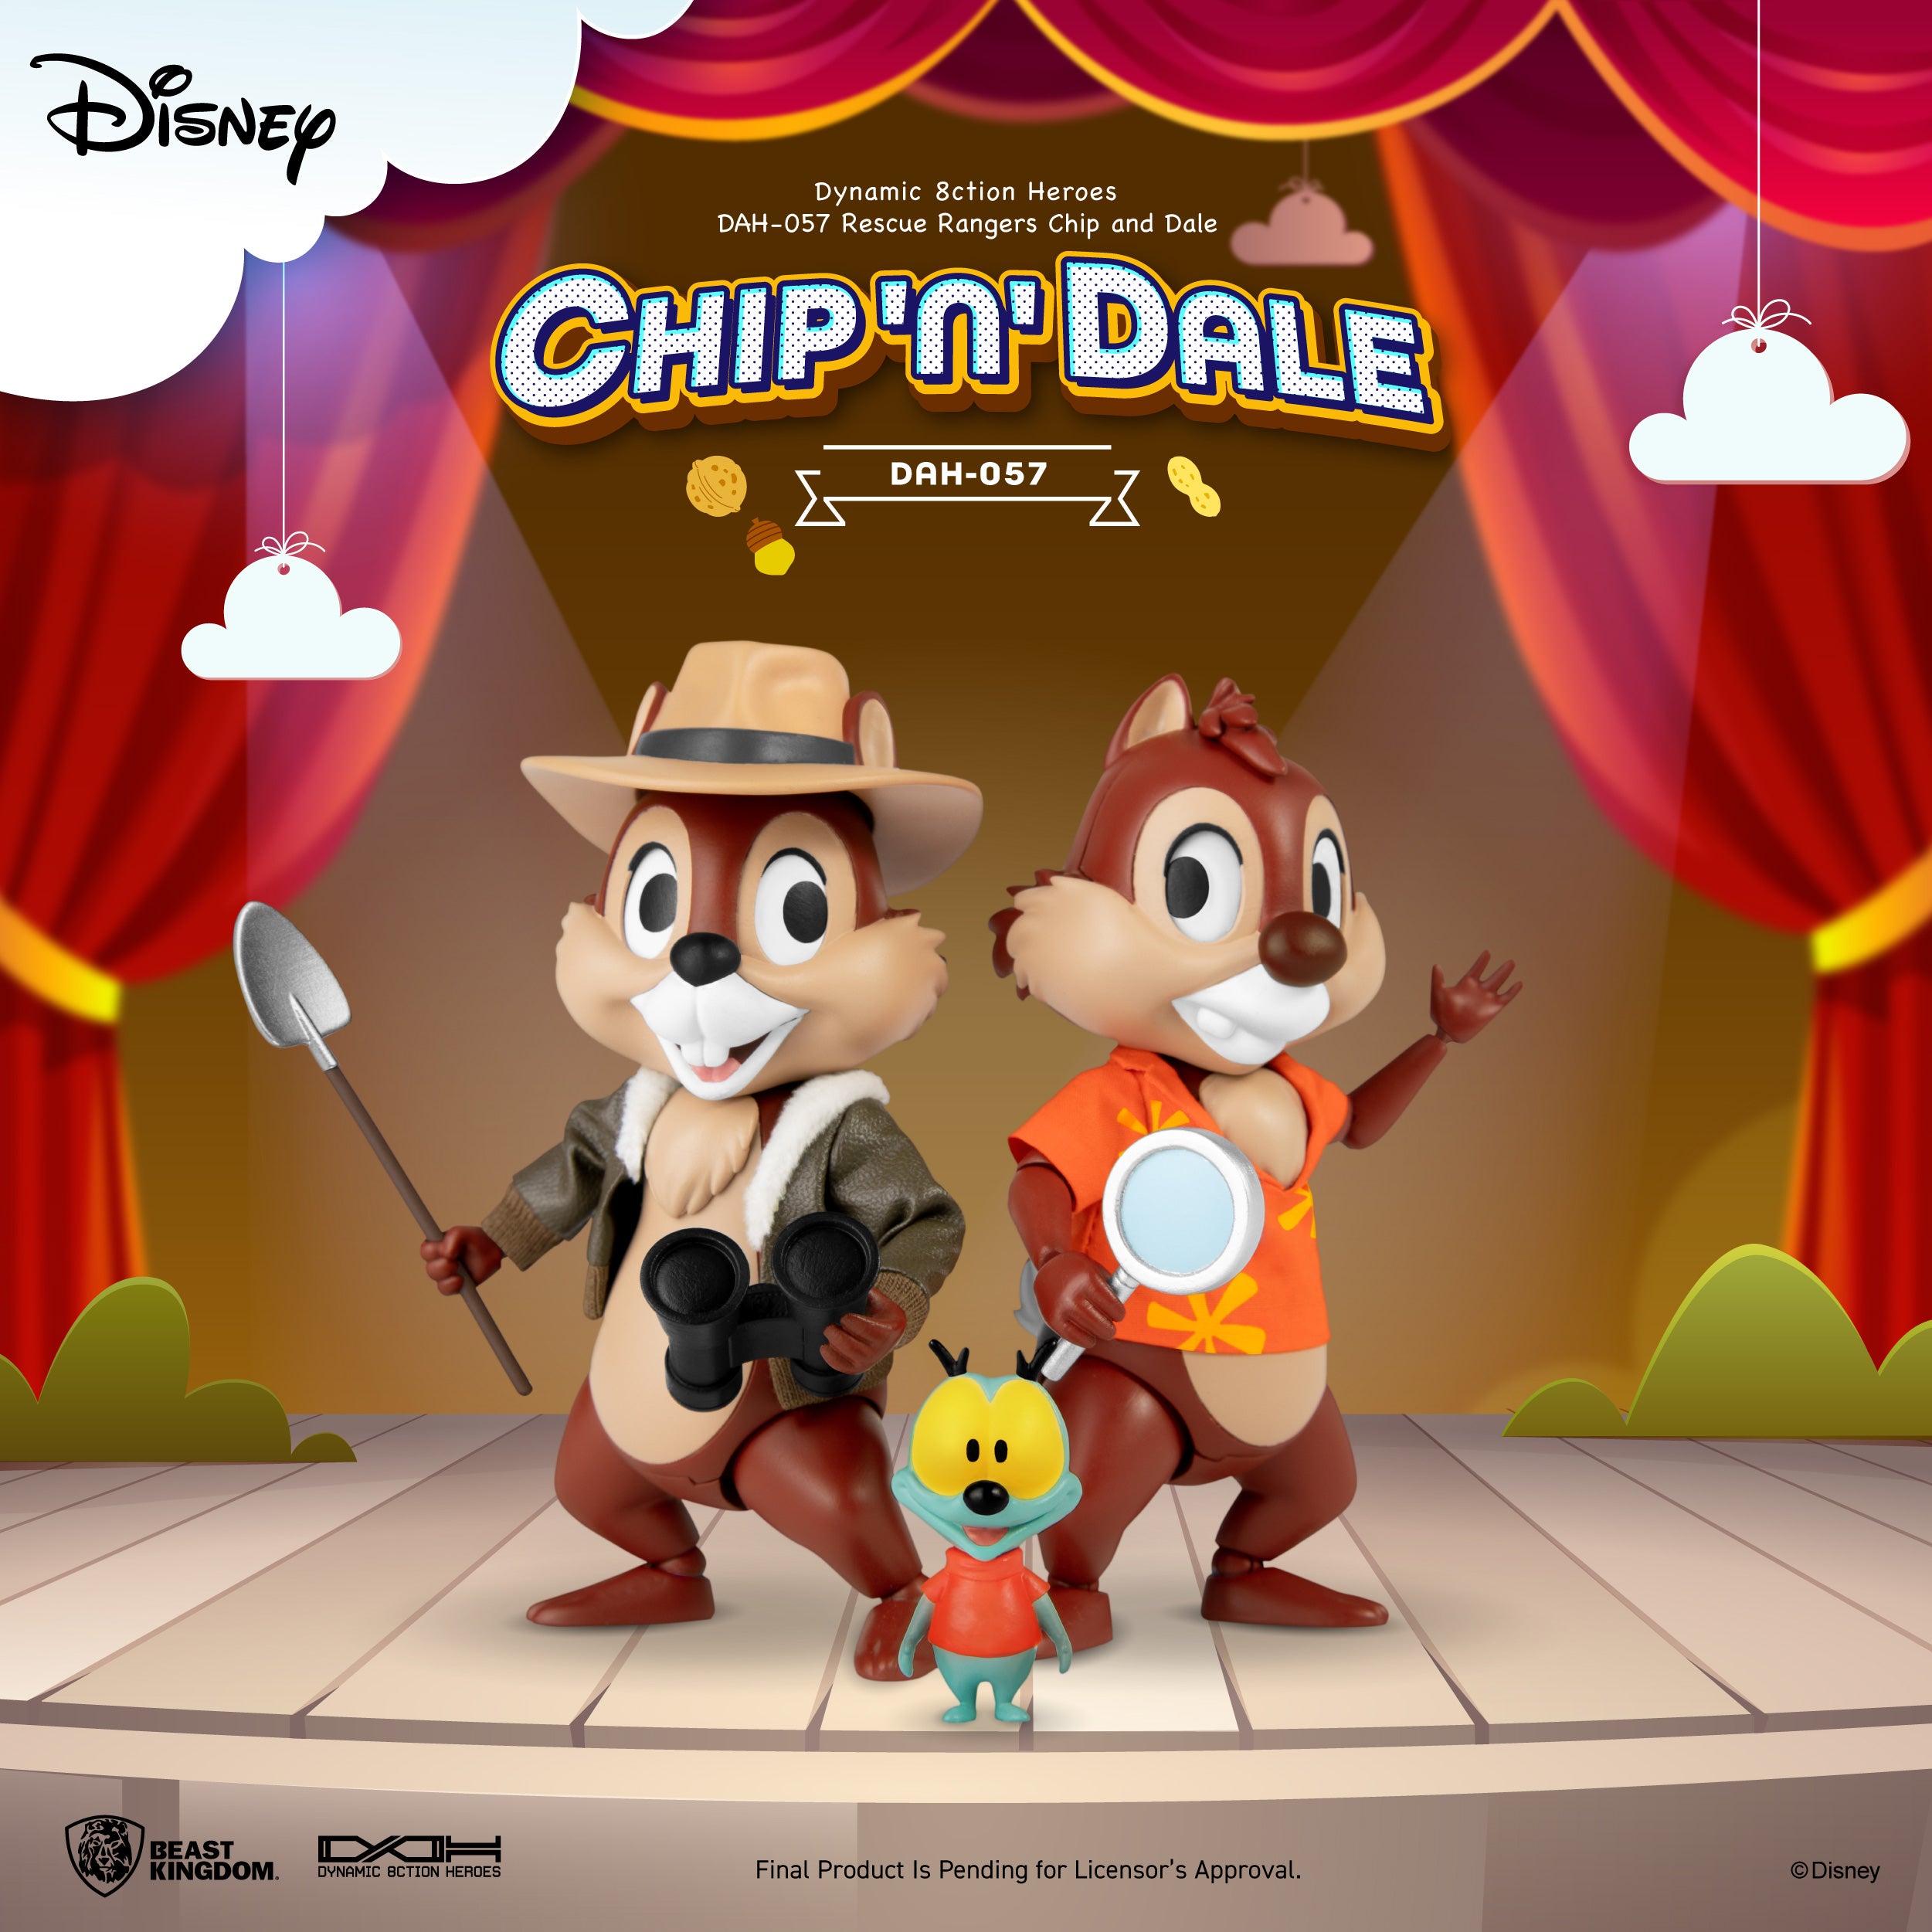 Beast Kingdom DAH-057 Disney Rescue Rangers Chip and Dale 1:9 Scale Dynamic 8ction Heroes Action Figure